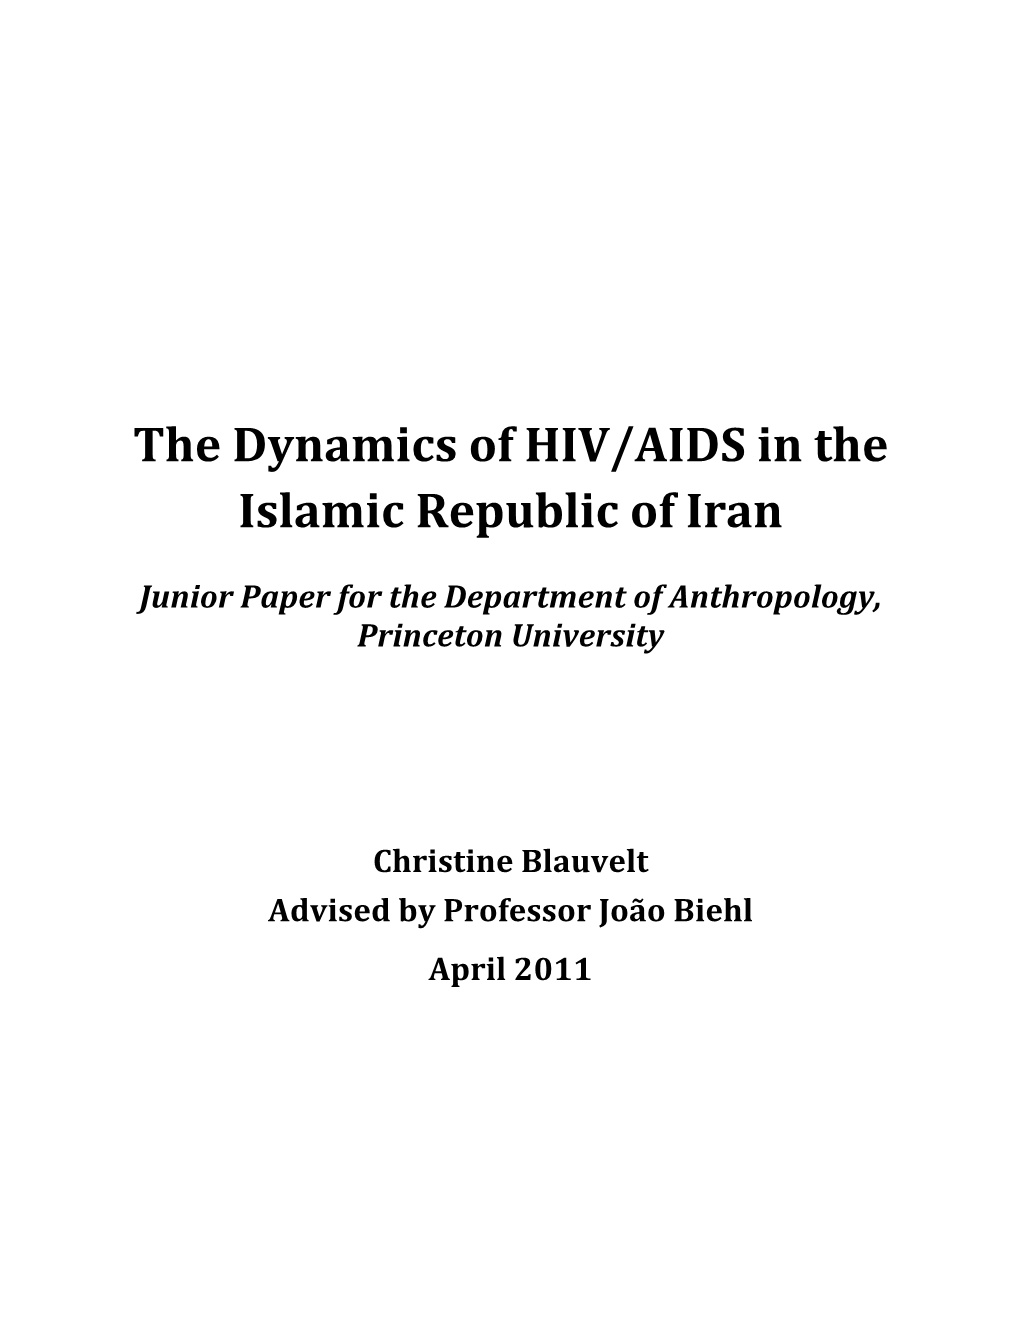 The Dynamics of HIV/AIDS in the Islamic Republic of Iran